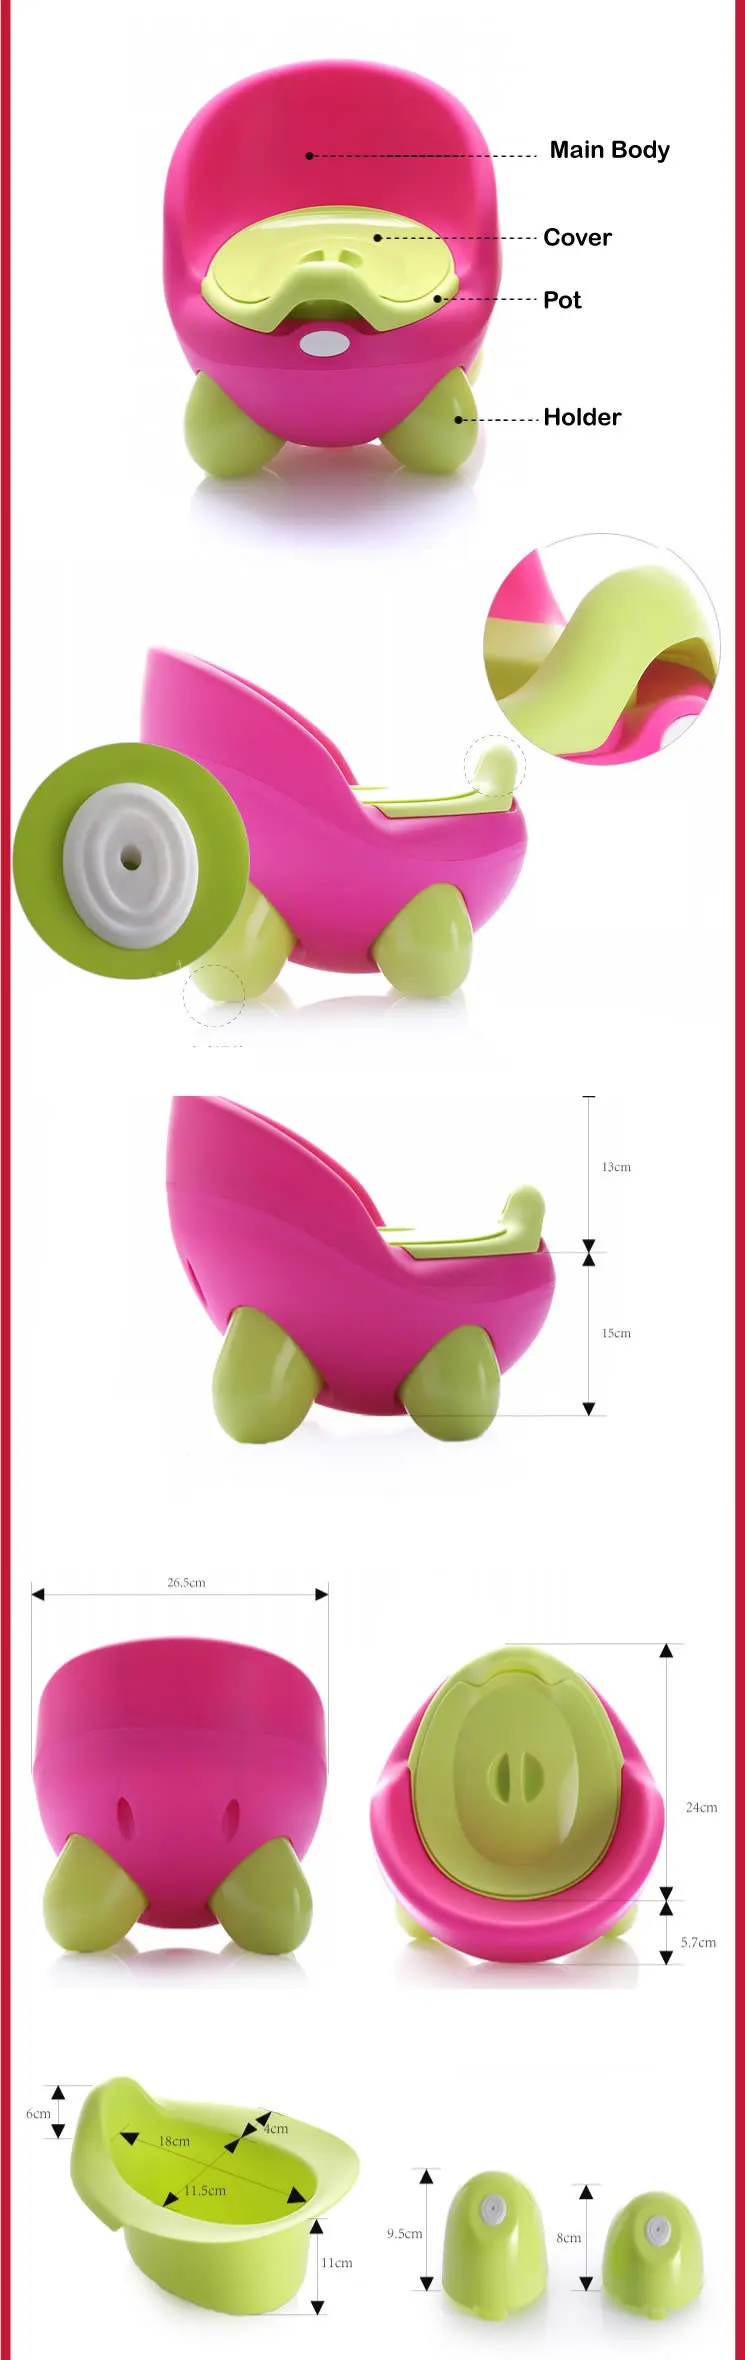 Baby Plastic Portable Toilet Seat Small Portable Toilets Colorful Seat